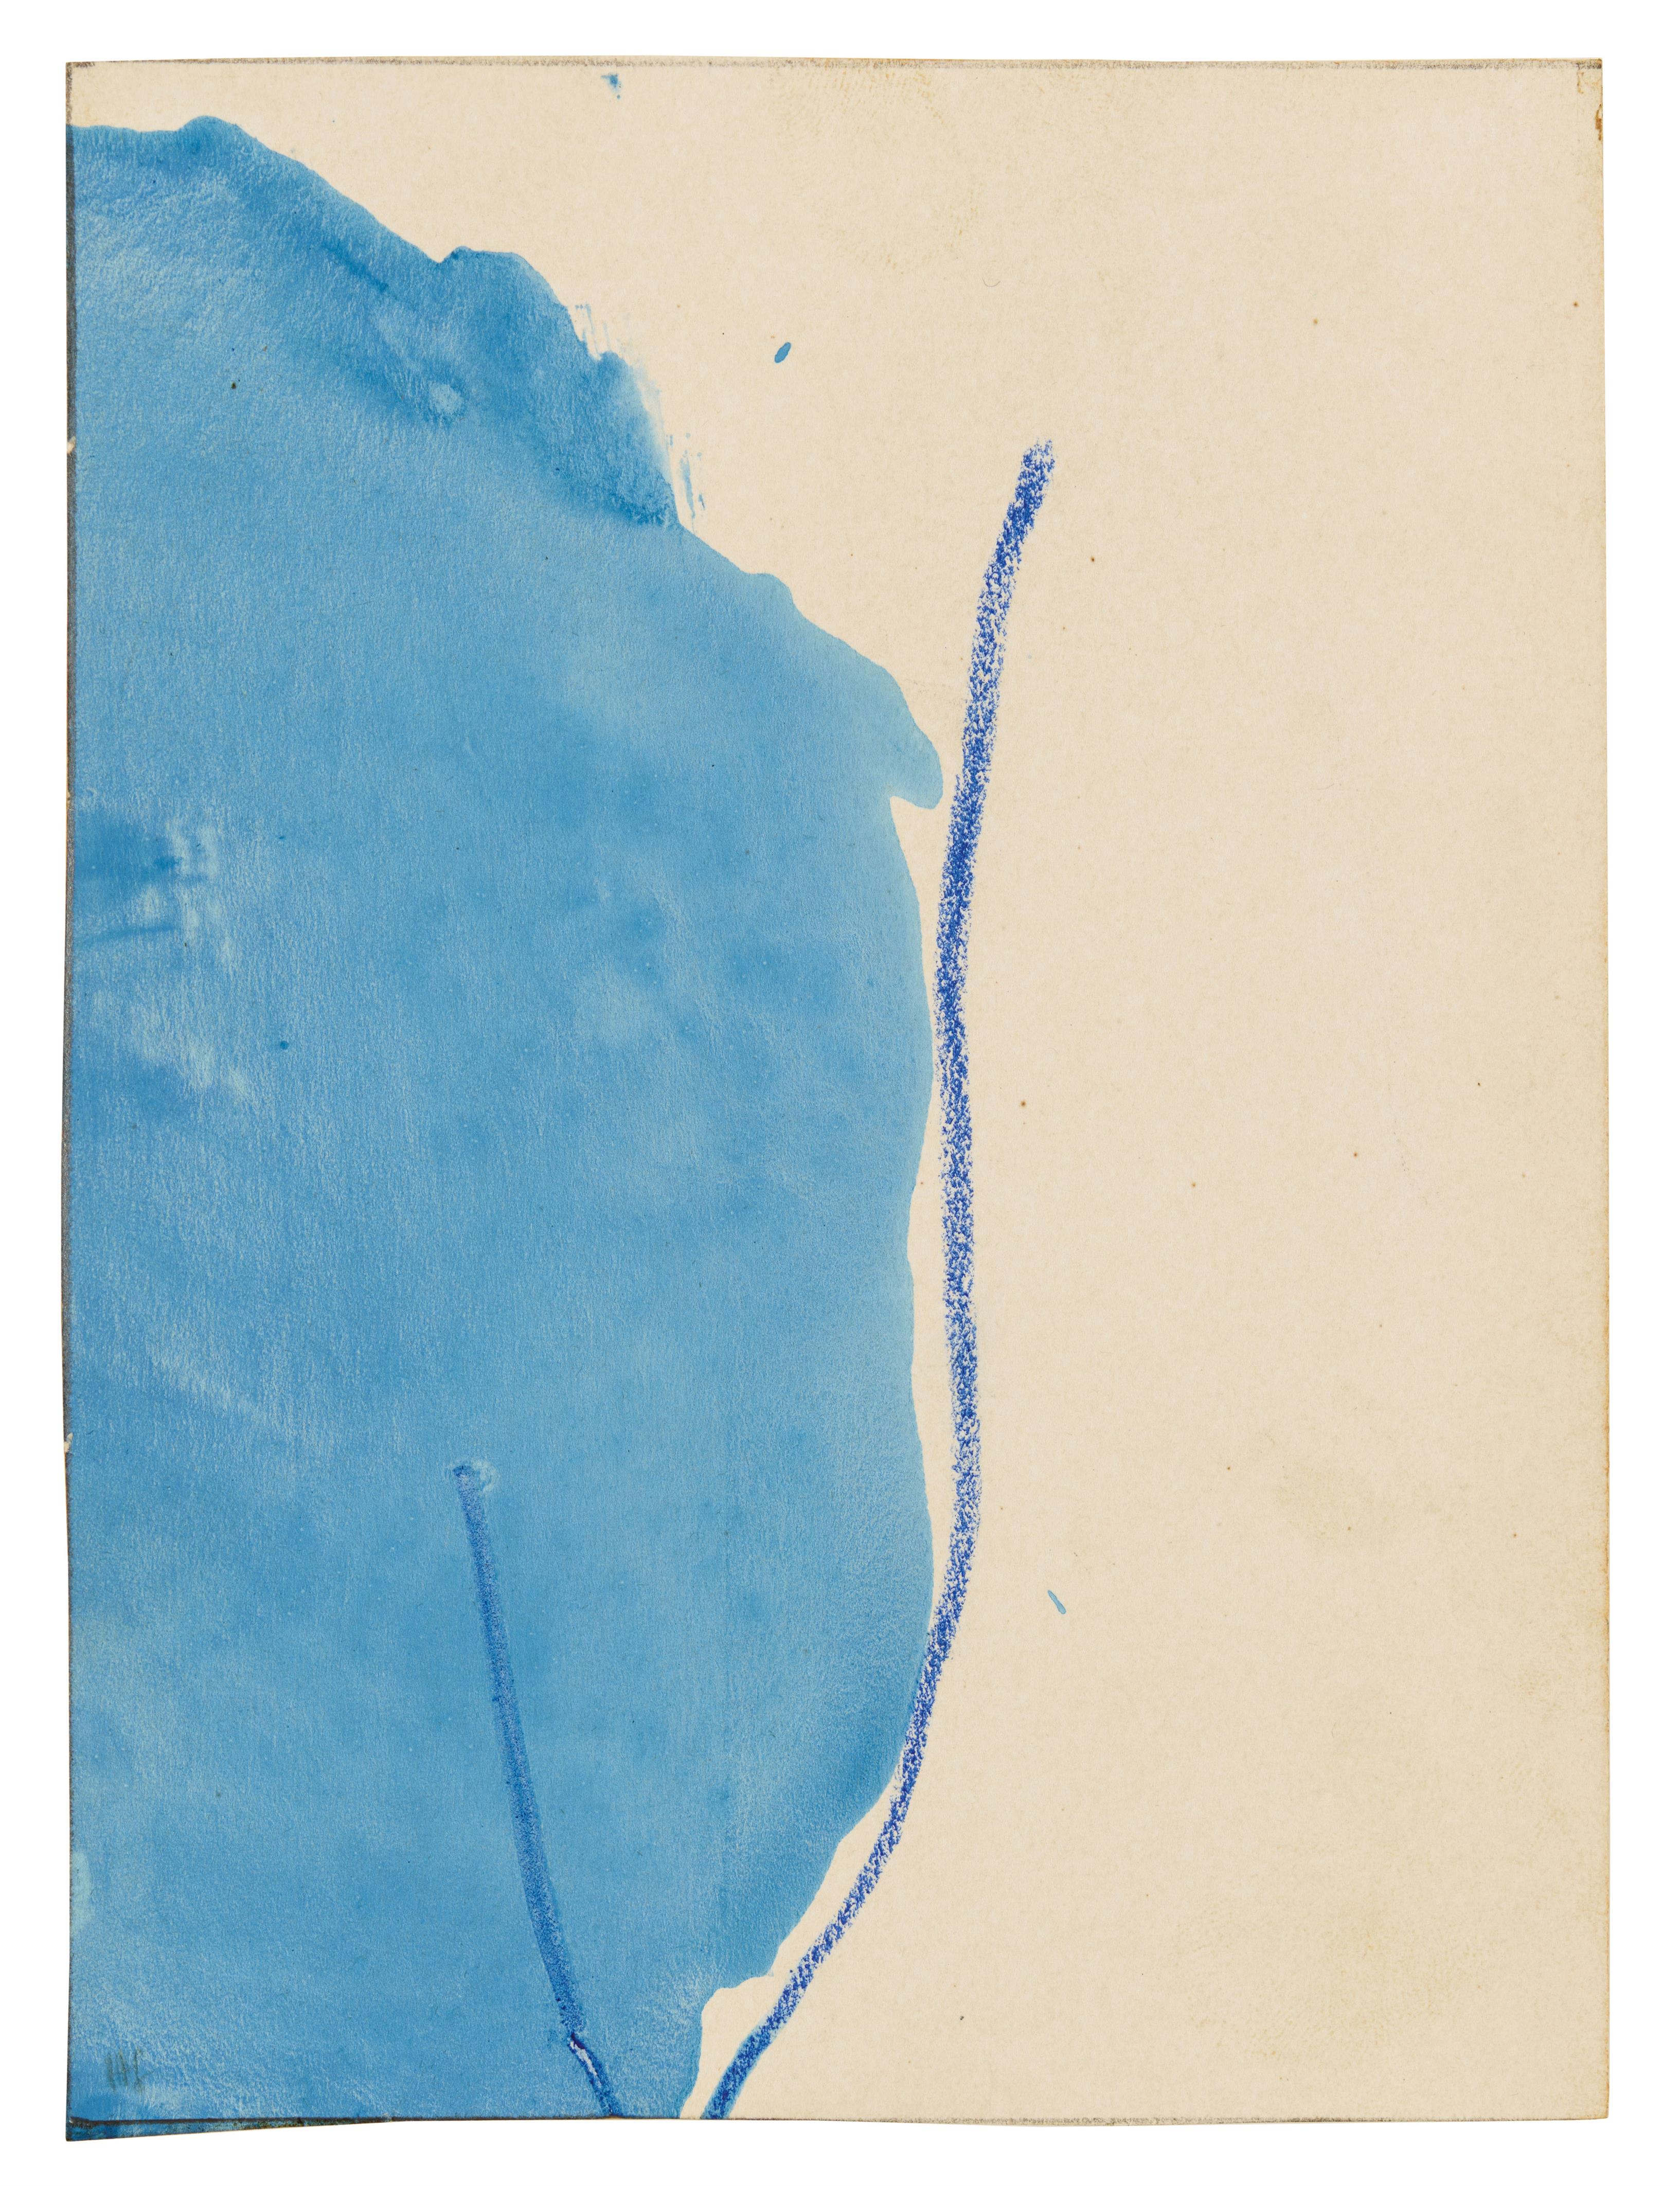 Helen Frankenthaler - Ohne Titel (Original cover for "The Blue Stairs", a book of poetry by Barbara Guest)